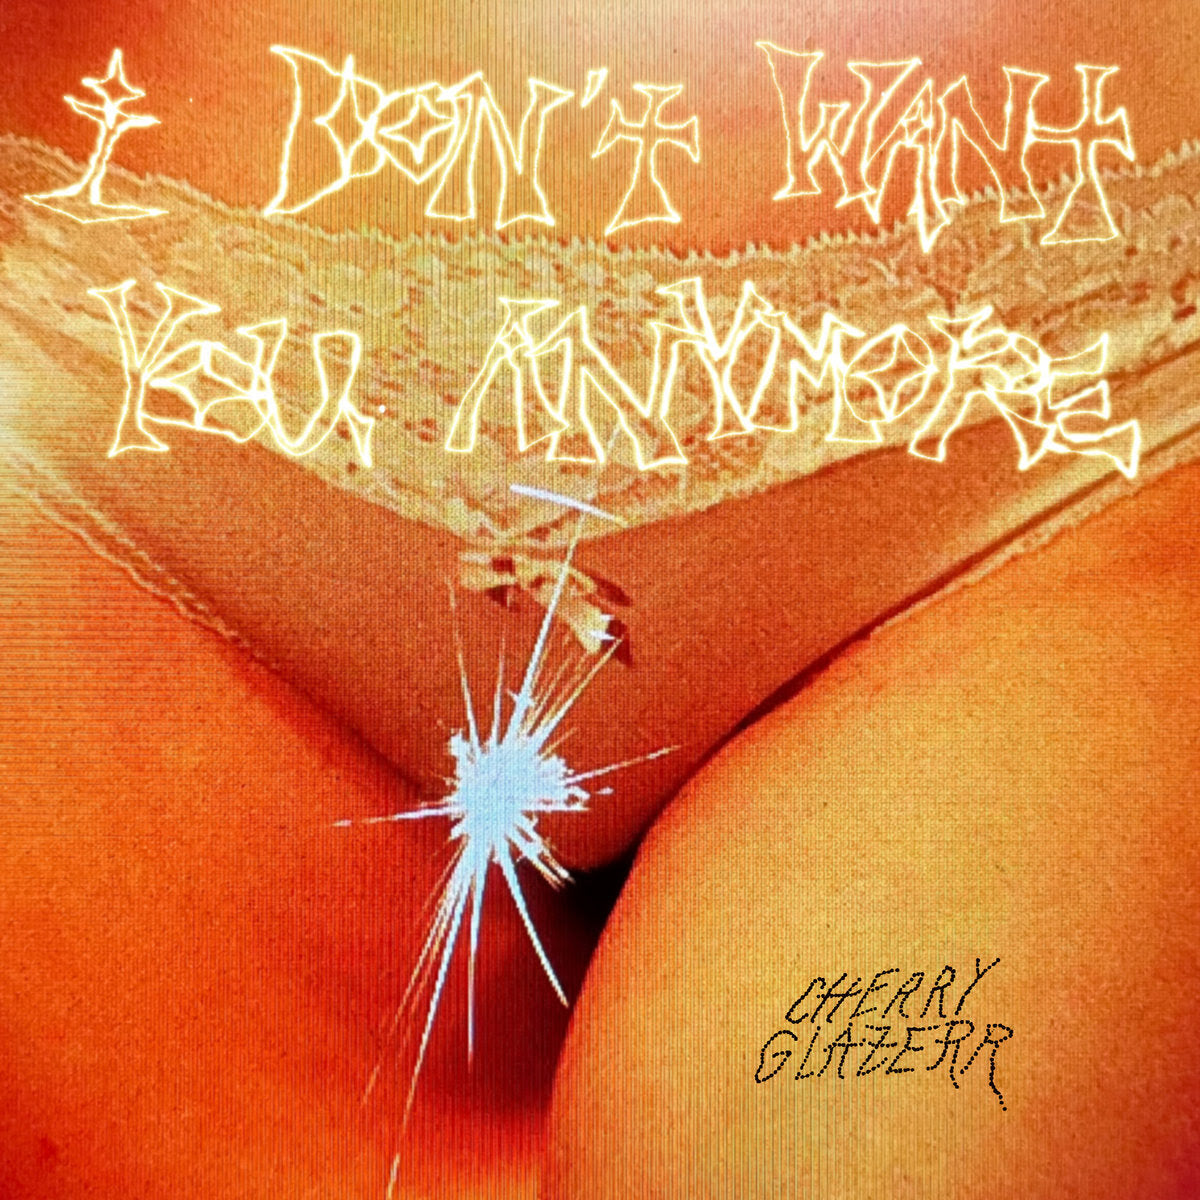 Cherry Glazerr - I Don’t Want You Anymore | Buy the Vinyl LP from Flying Nun Records 